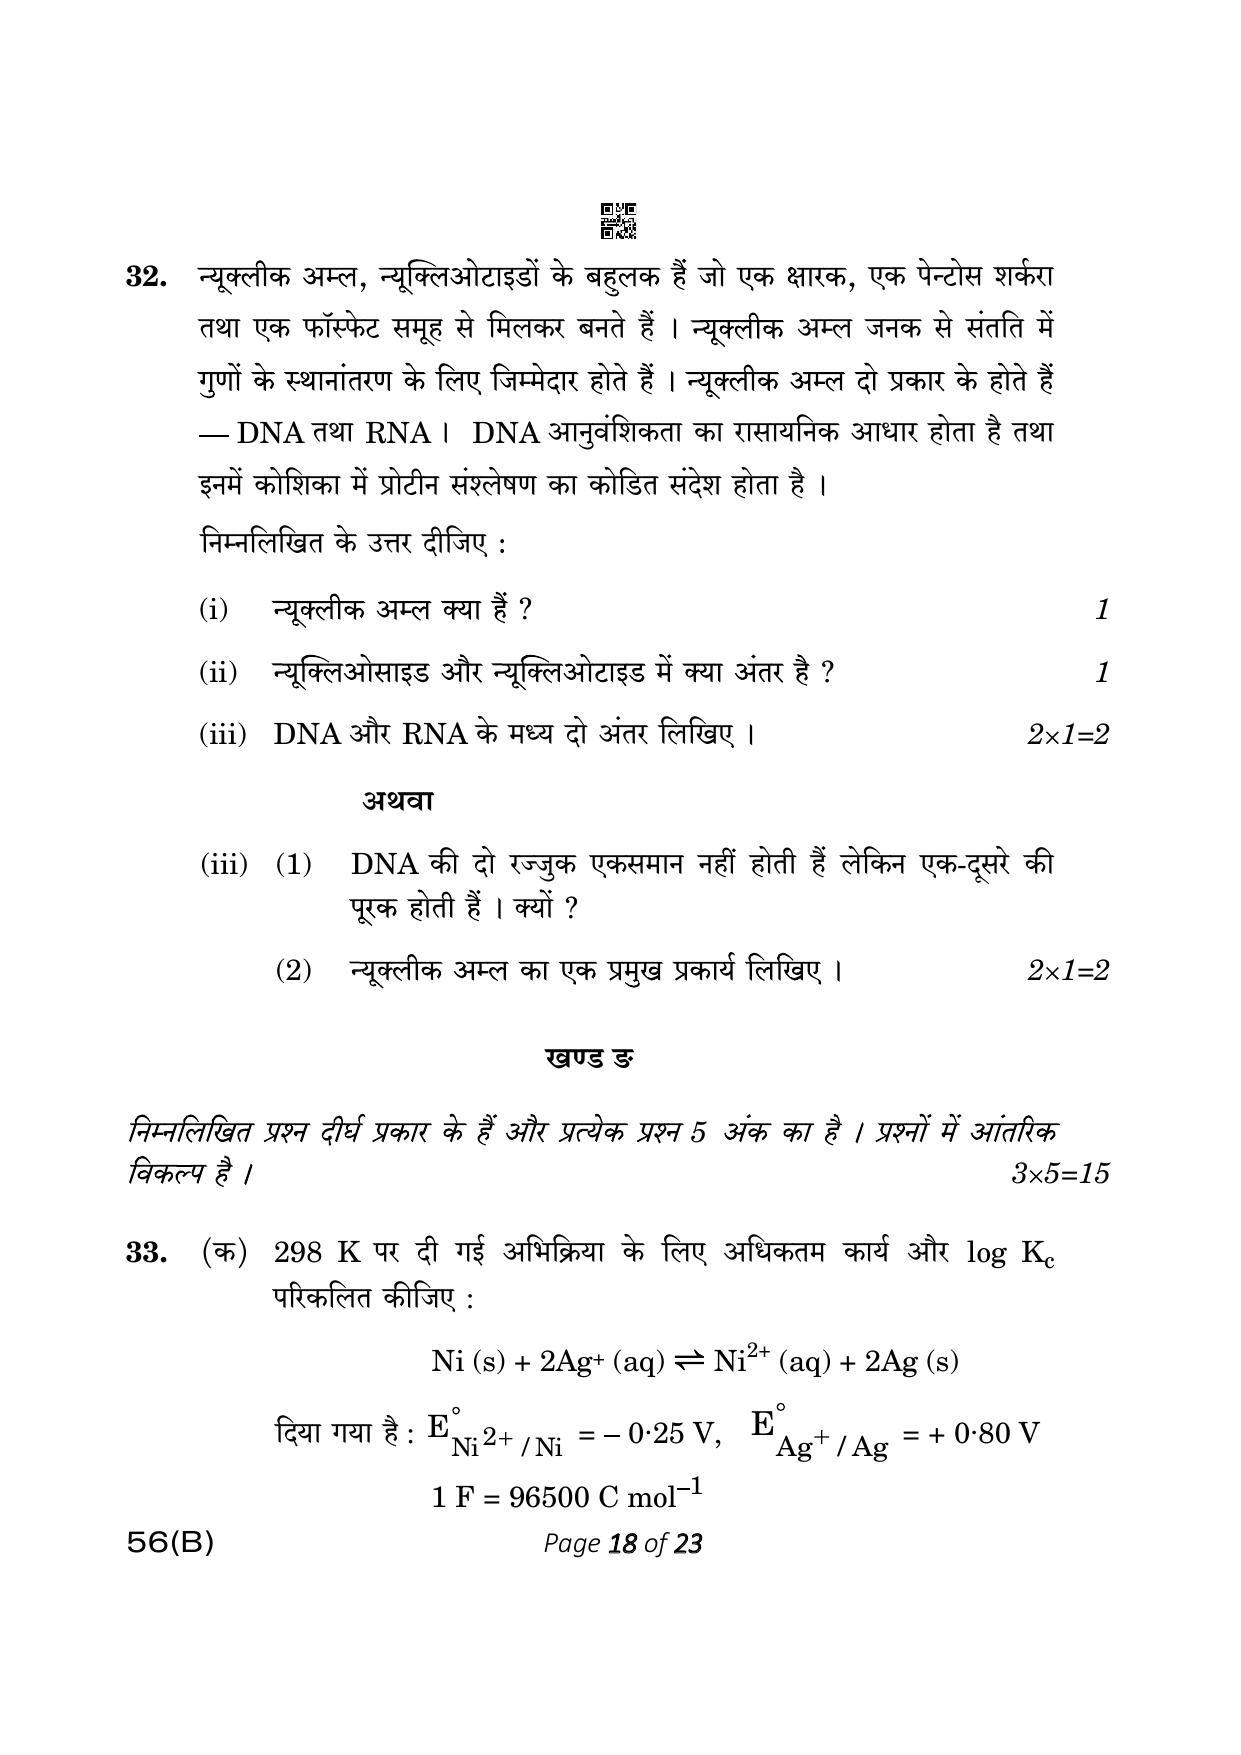 CBSE Class 12 56-B Chemistry 2023 (Compartment) Question Paper - Page 18